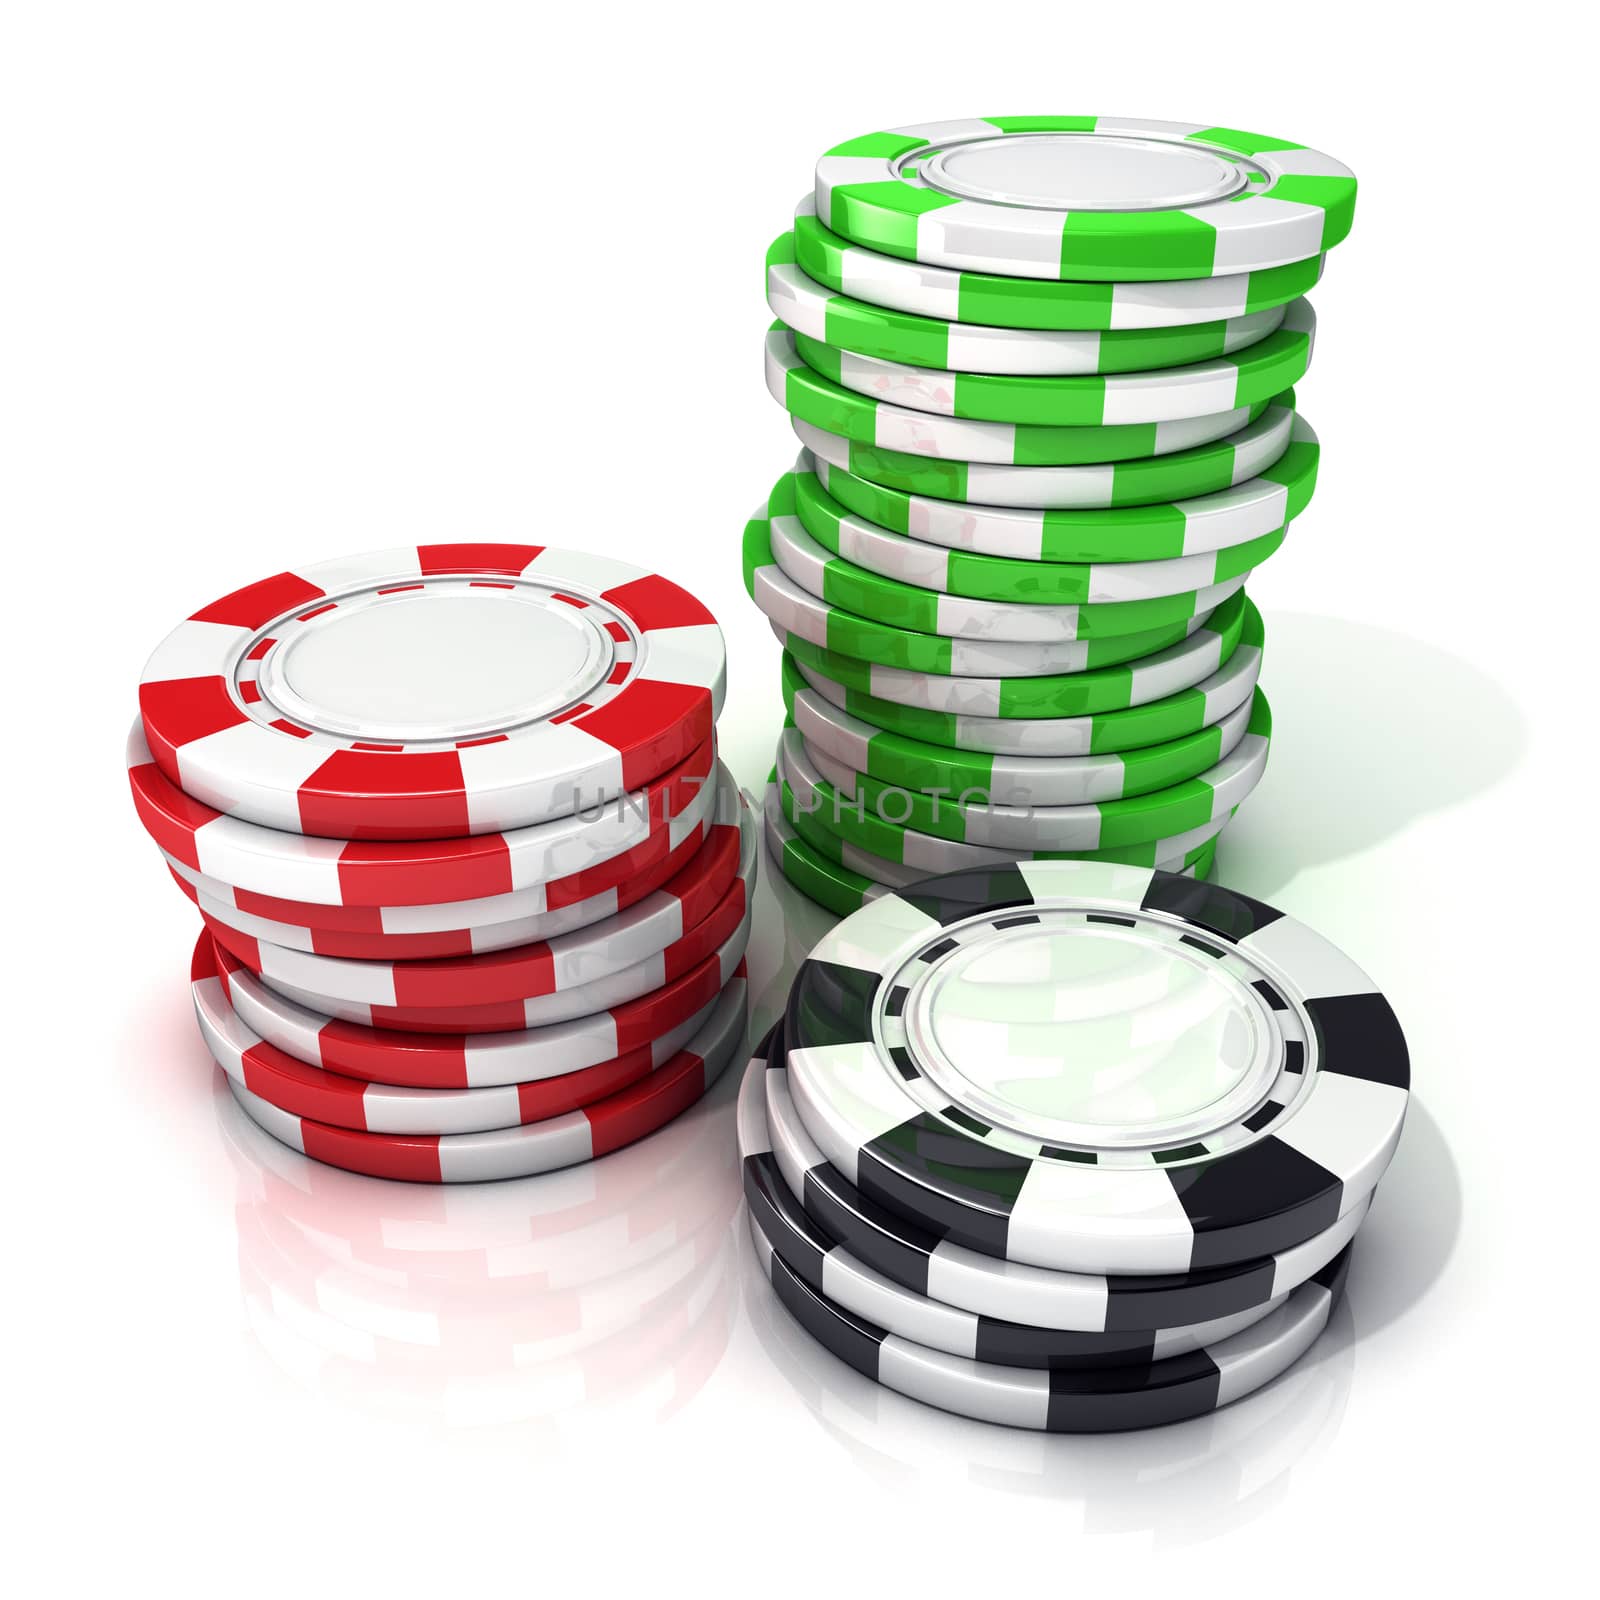 Stacks of red, green and black gambling chips isolated on white background.